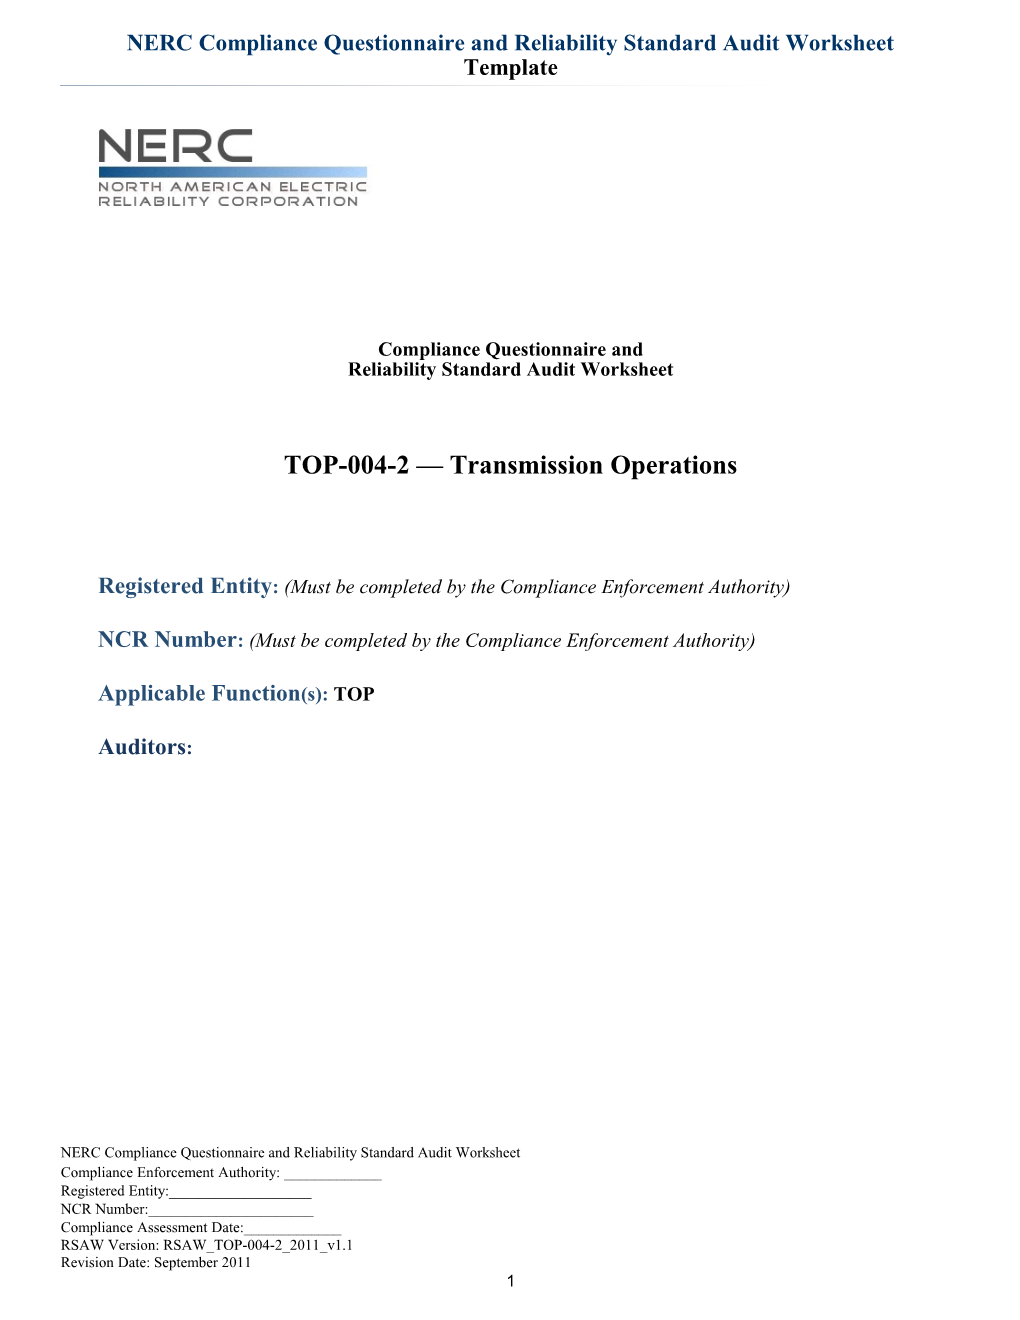 NERC Compliance Questionnaire and Reliability Standard Audit Worksheet